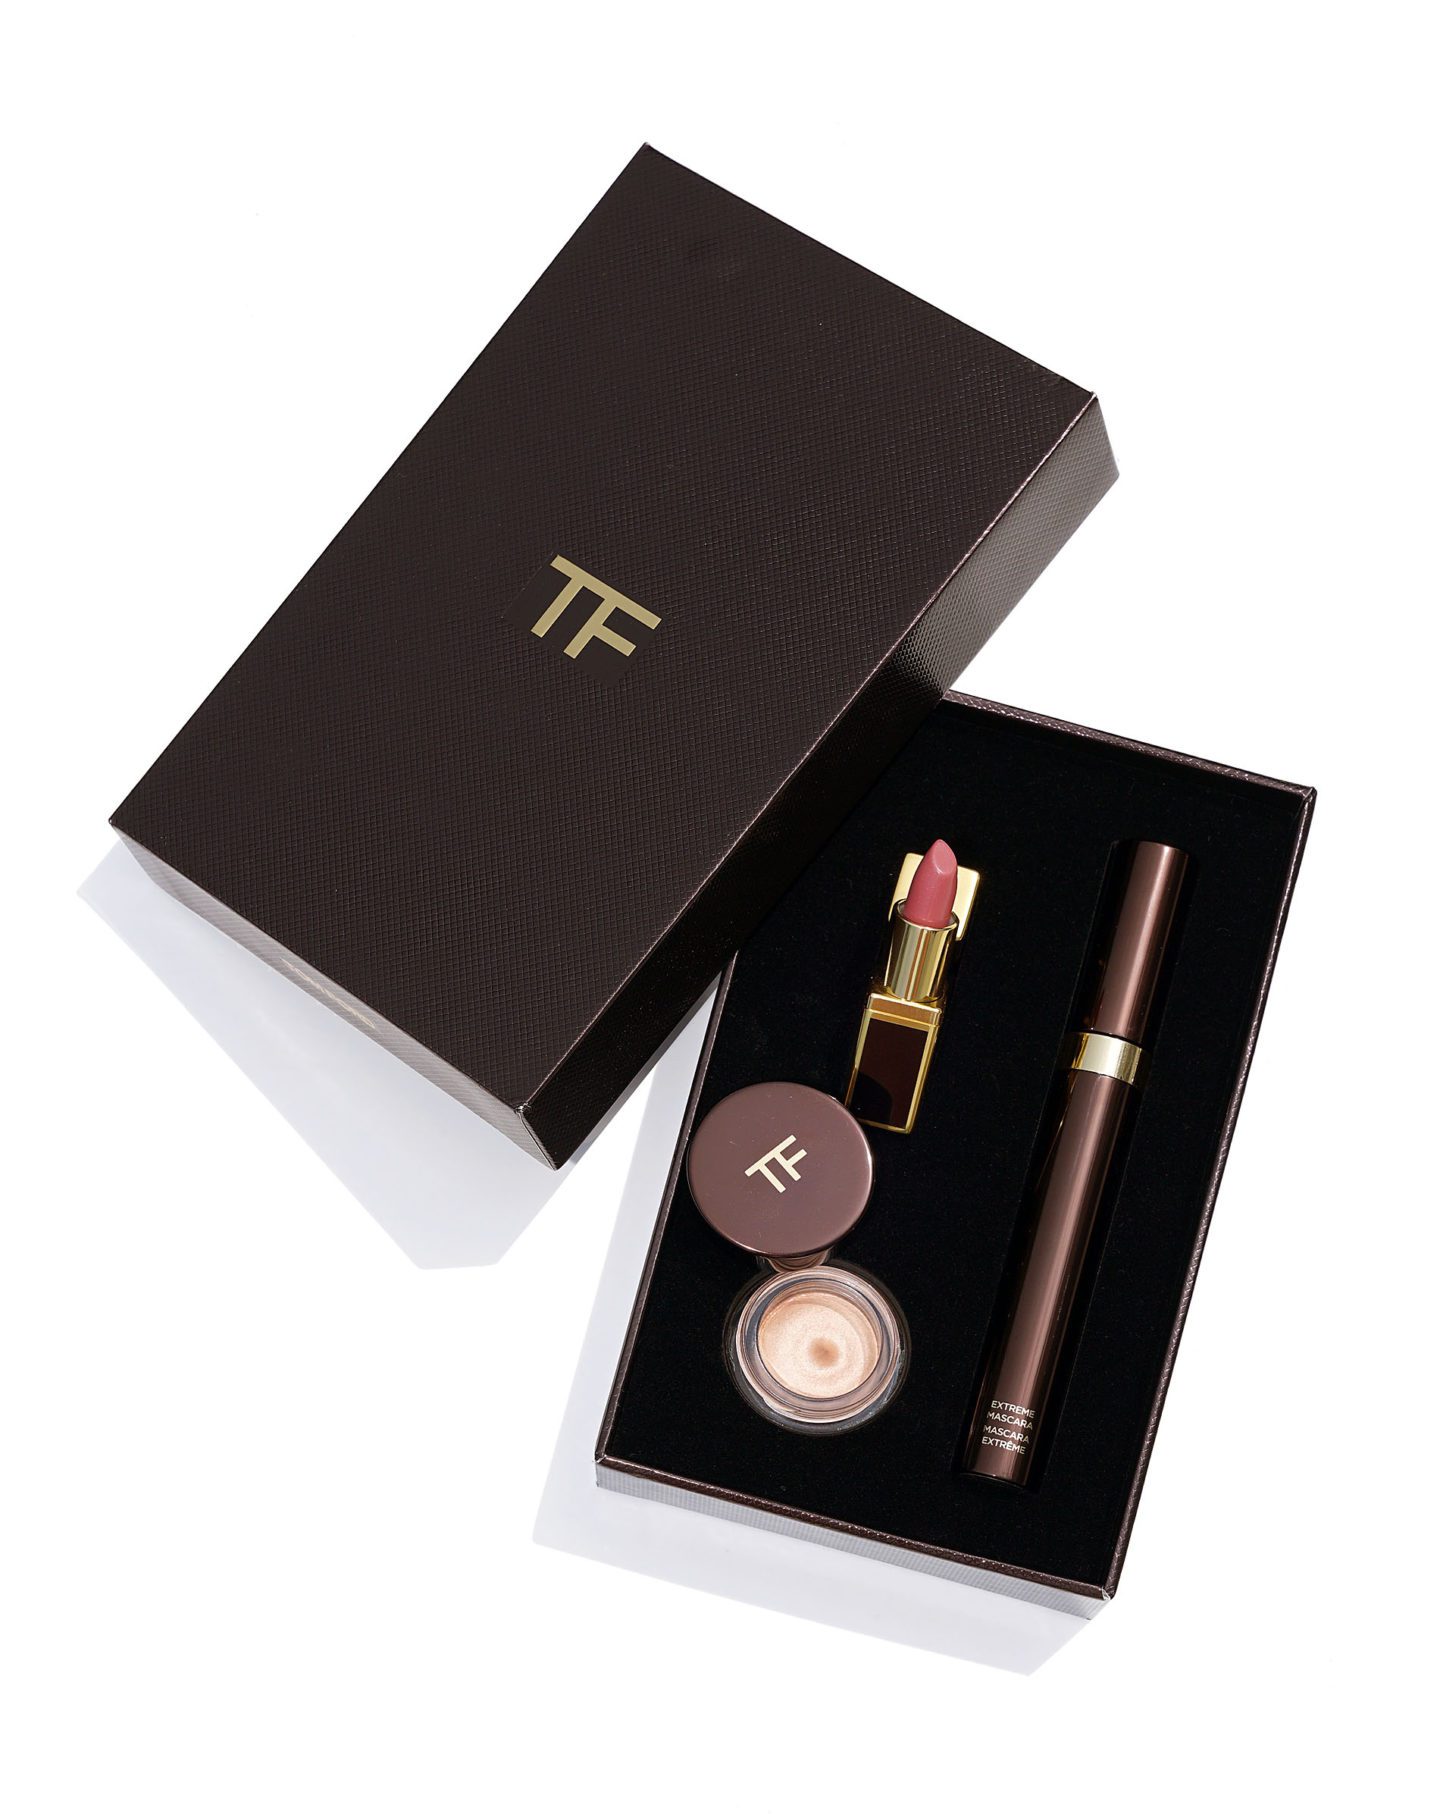 Tom Ford Golden Rose Eye Lip Set Nordstrom Anniversary Sale | The Beauty Look Book